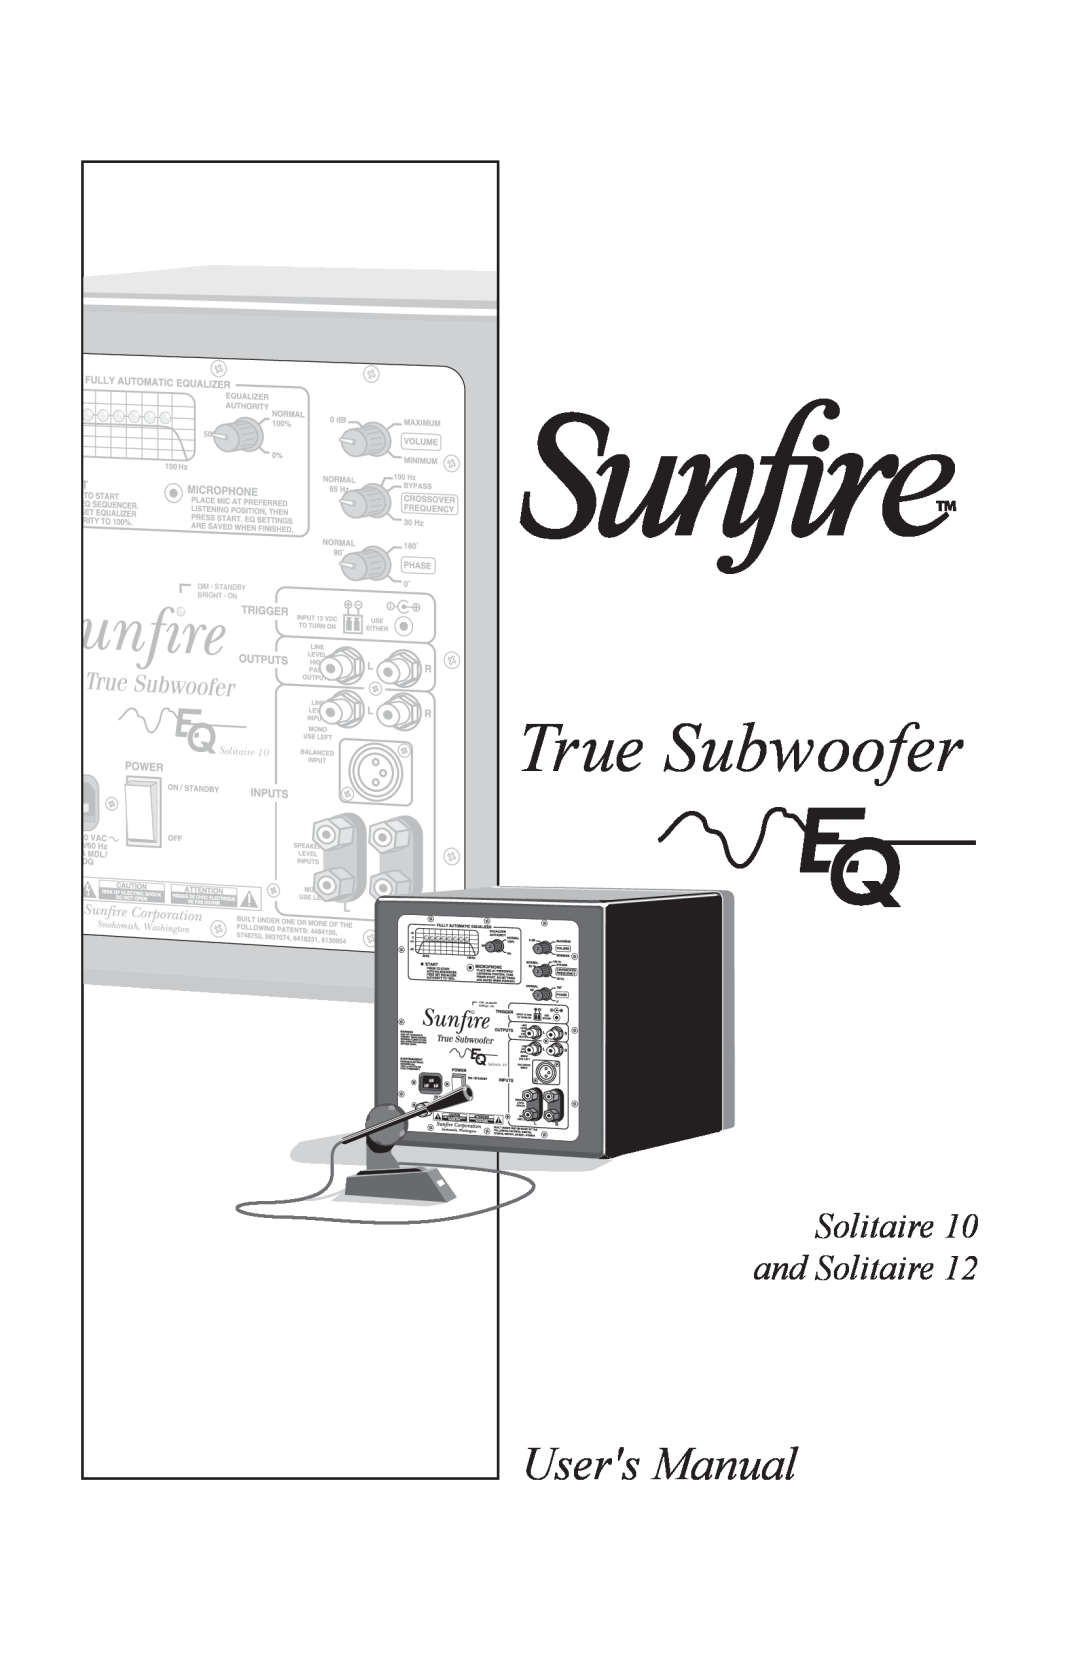 Sunfire Solitaire 10 user manual True Subwoofer, Solitaire and Solitaire, Dim - Standby, Bright - On 